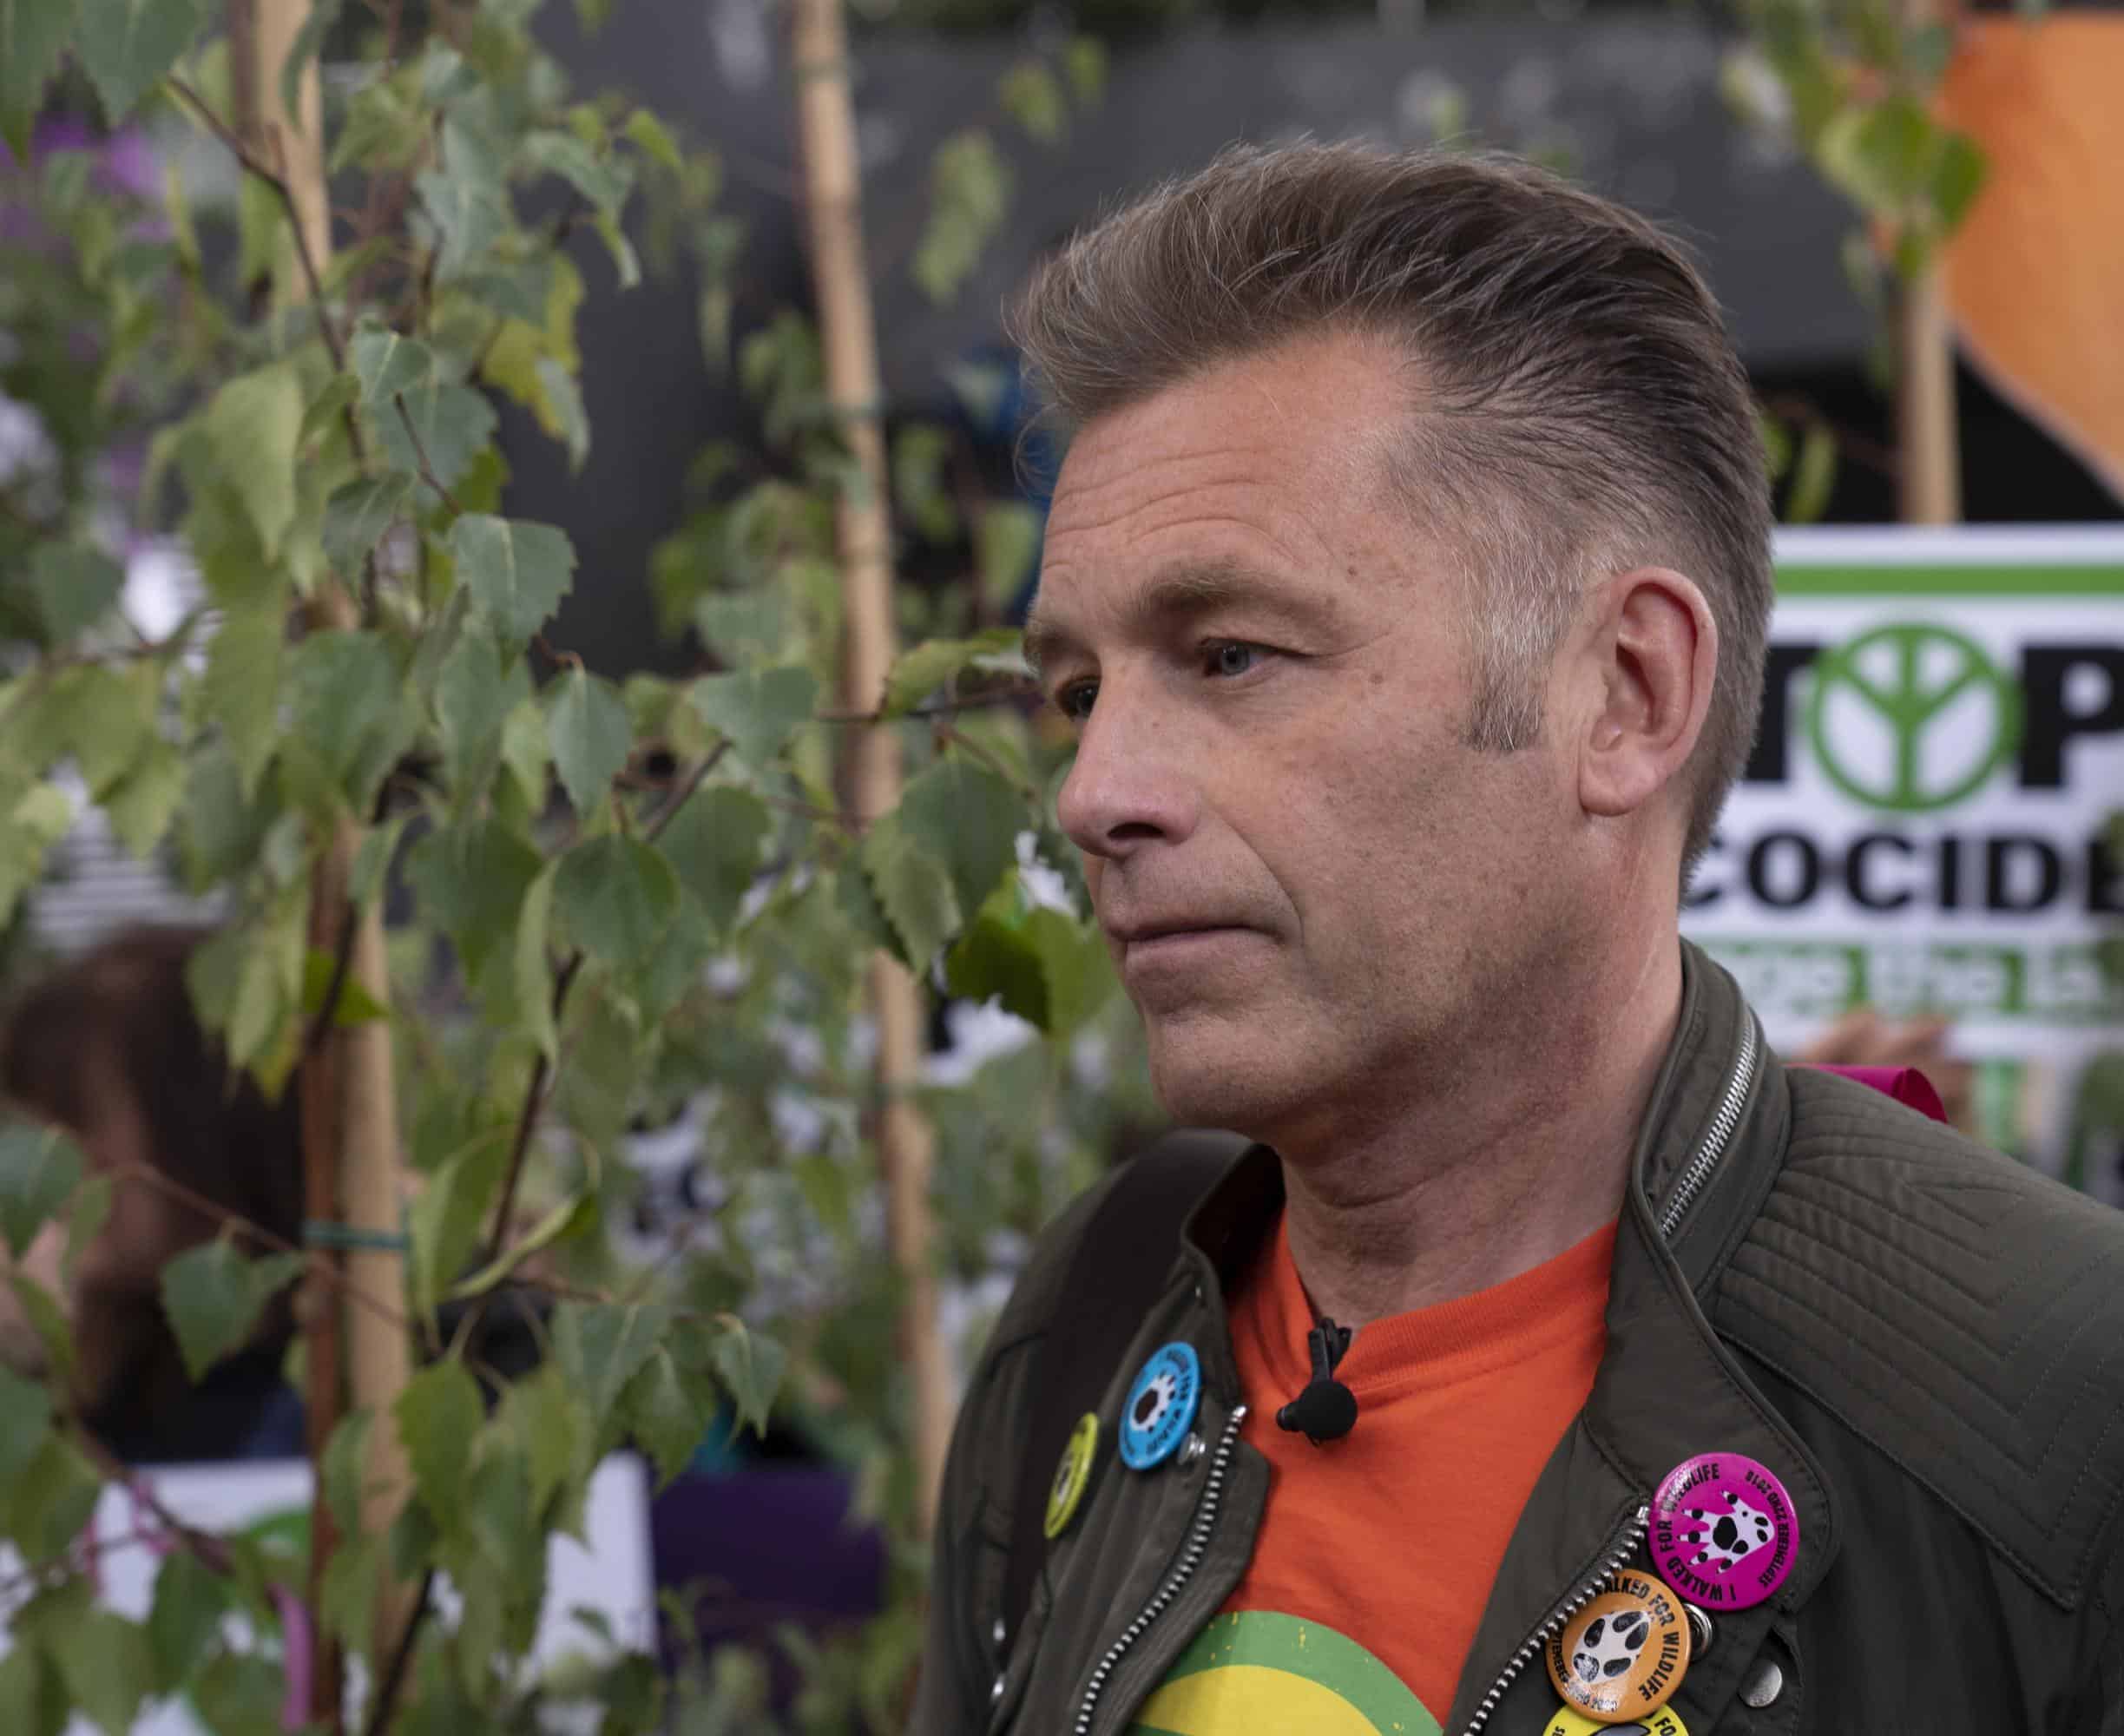 Smallpox and malaria are there to regulate our population, says Chris Packham